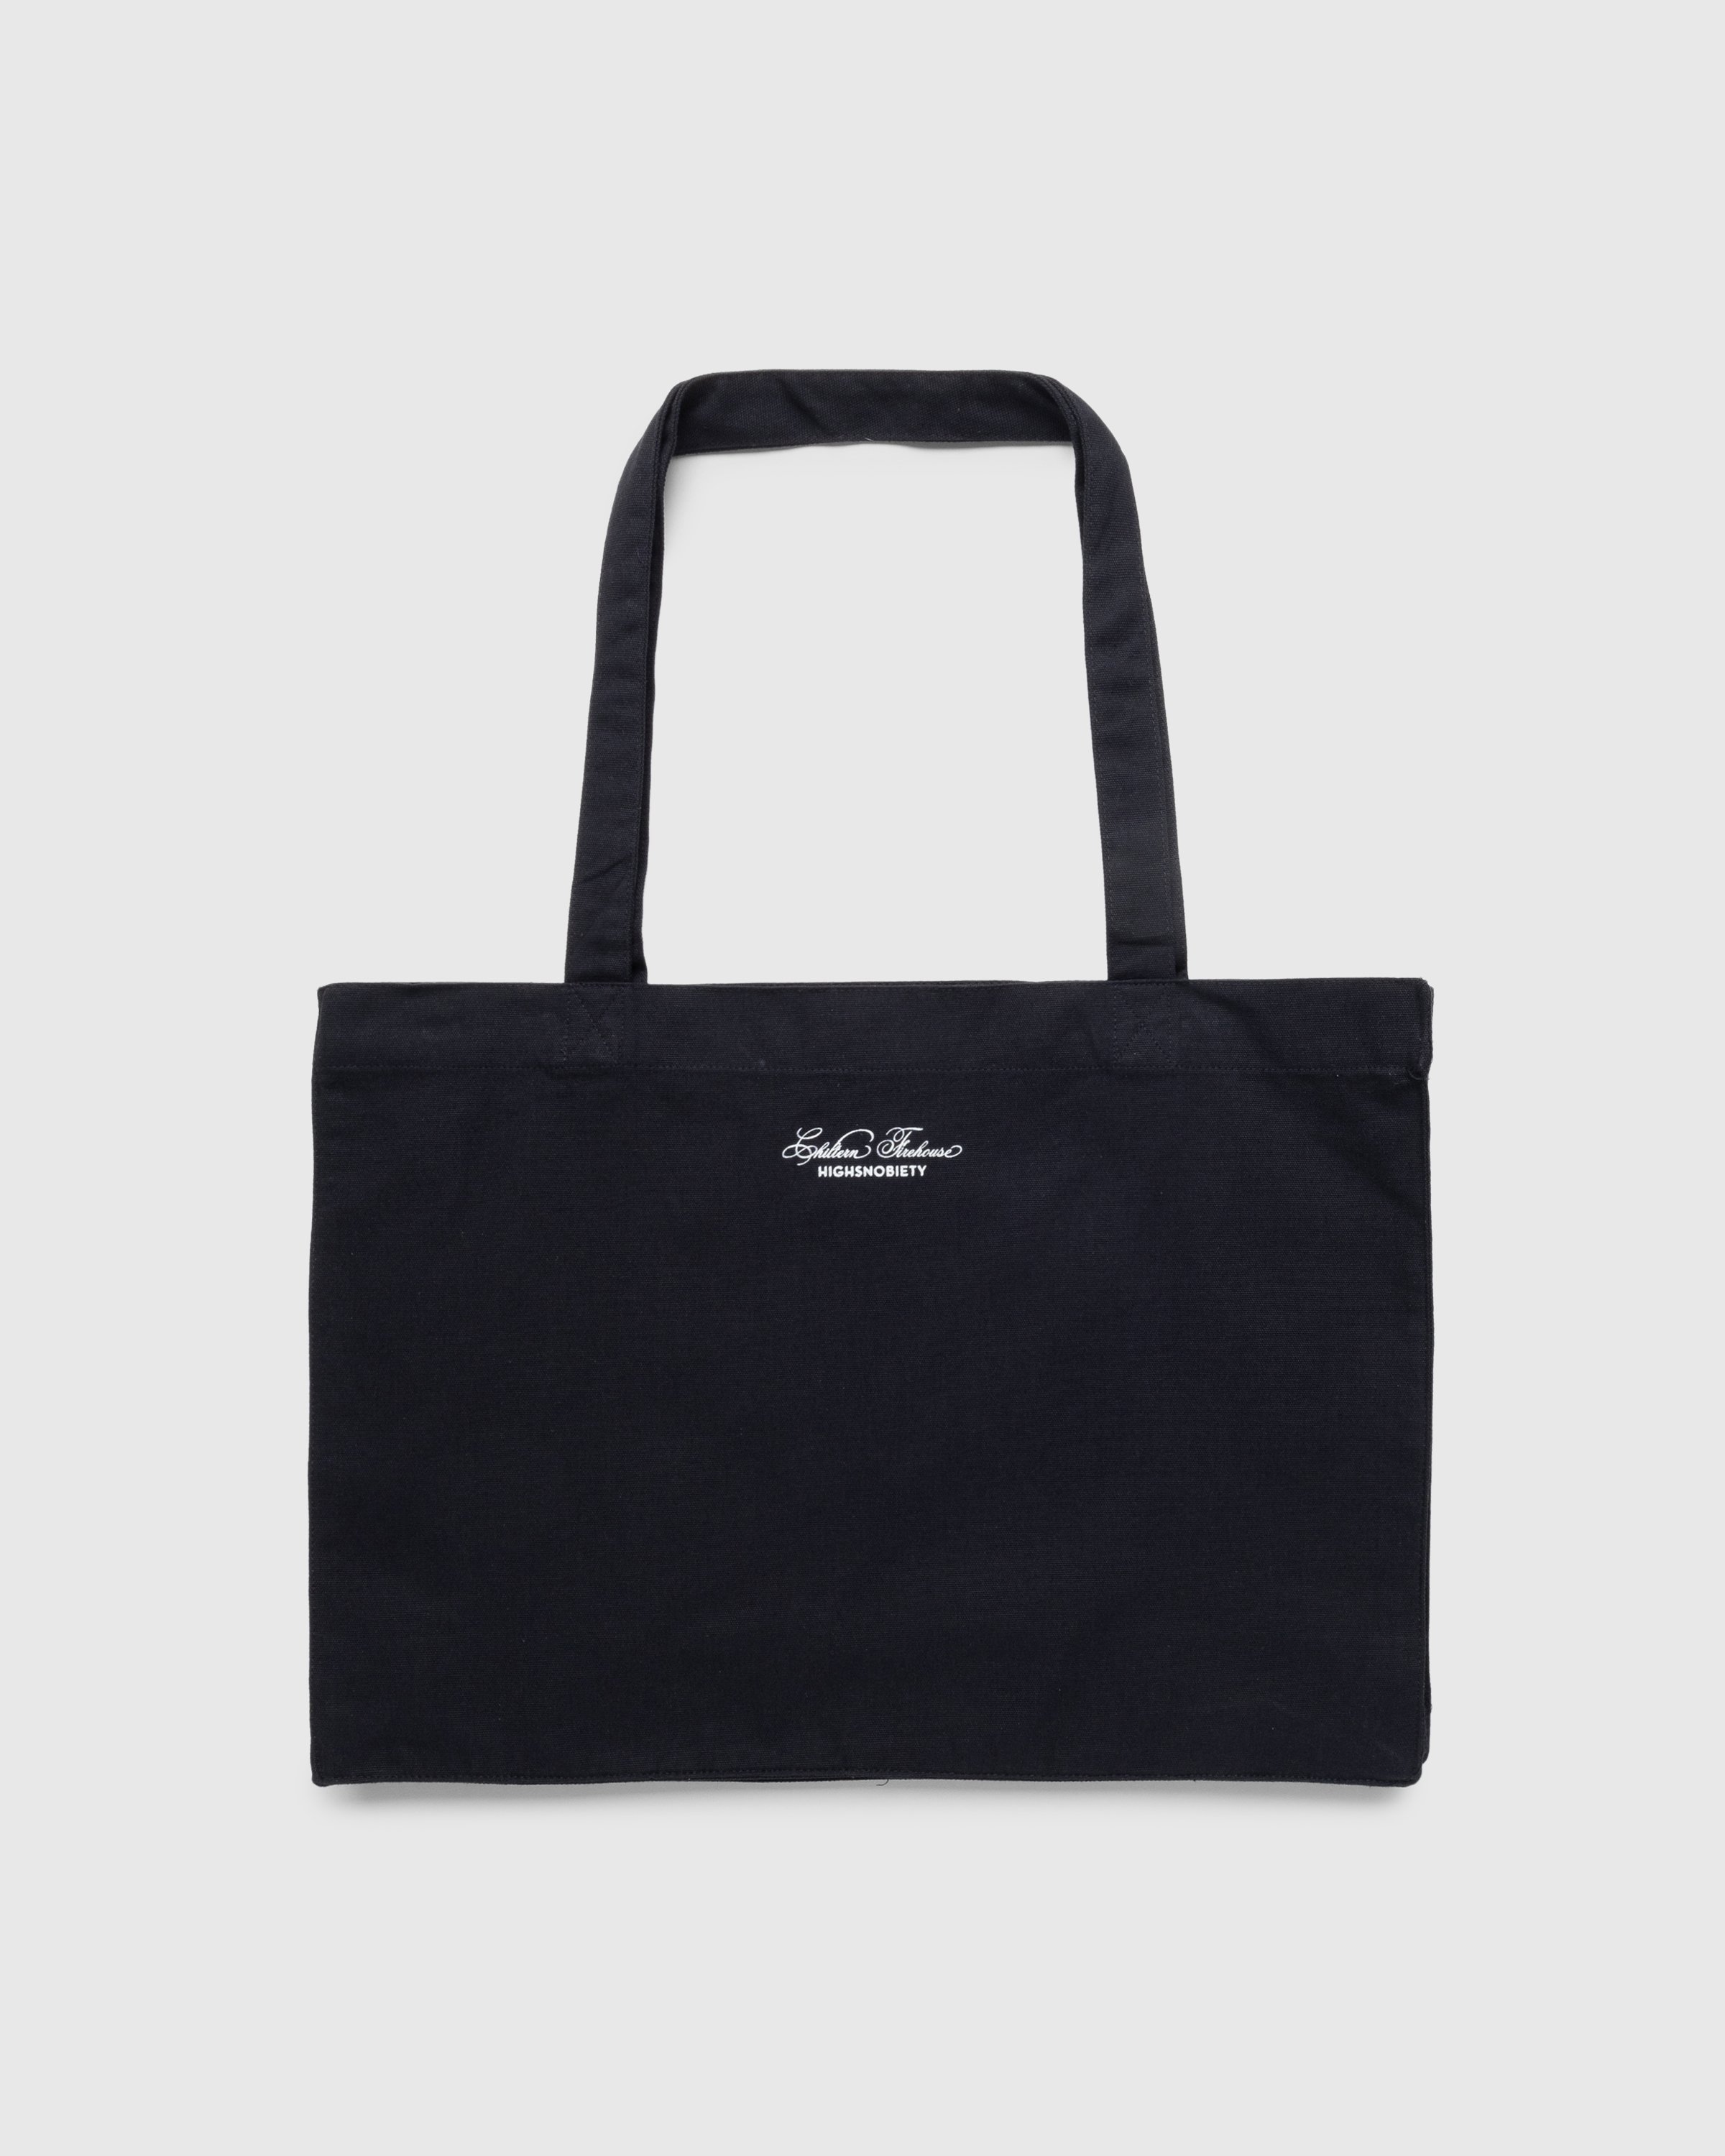 Chiltern Firehouse x Highsnobiety - Tote Bag - Accessories - Black - Image 2